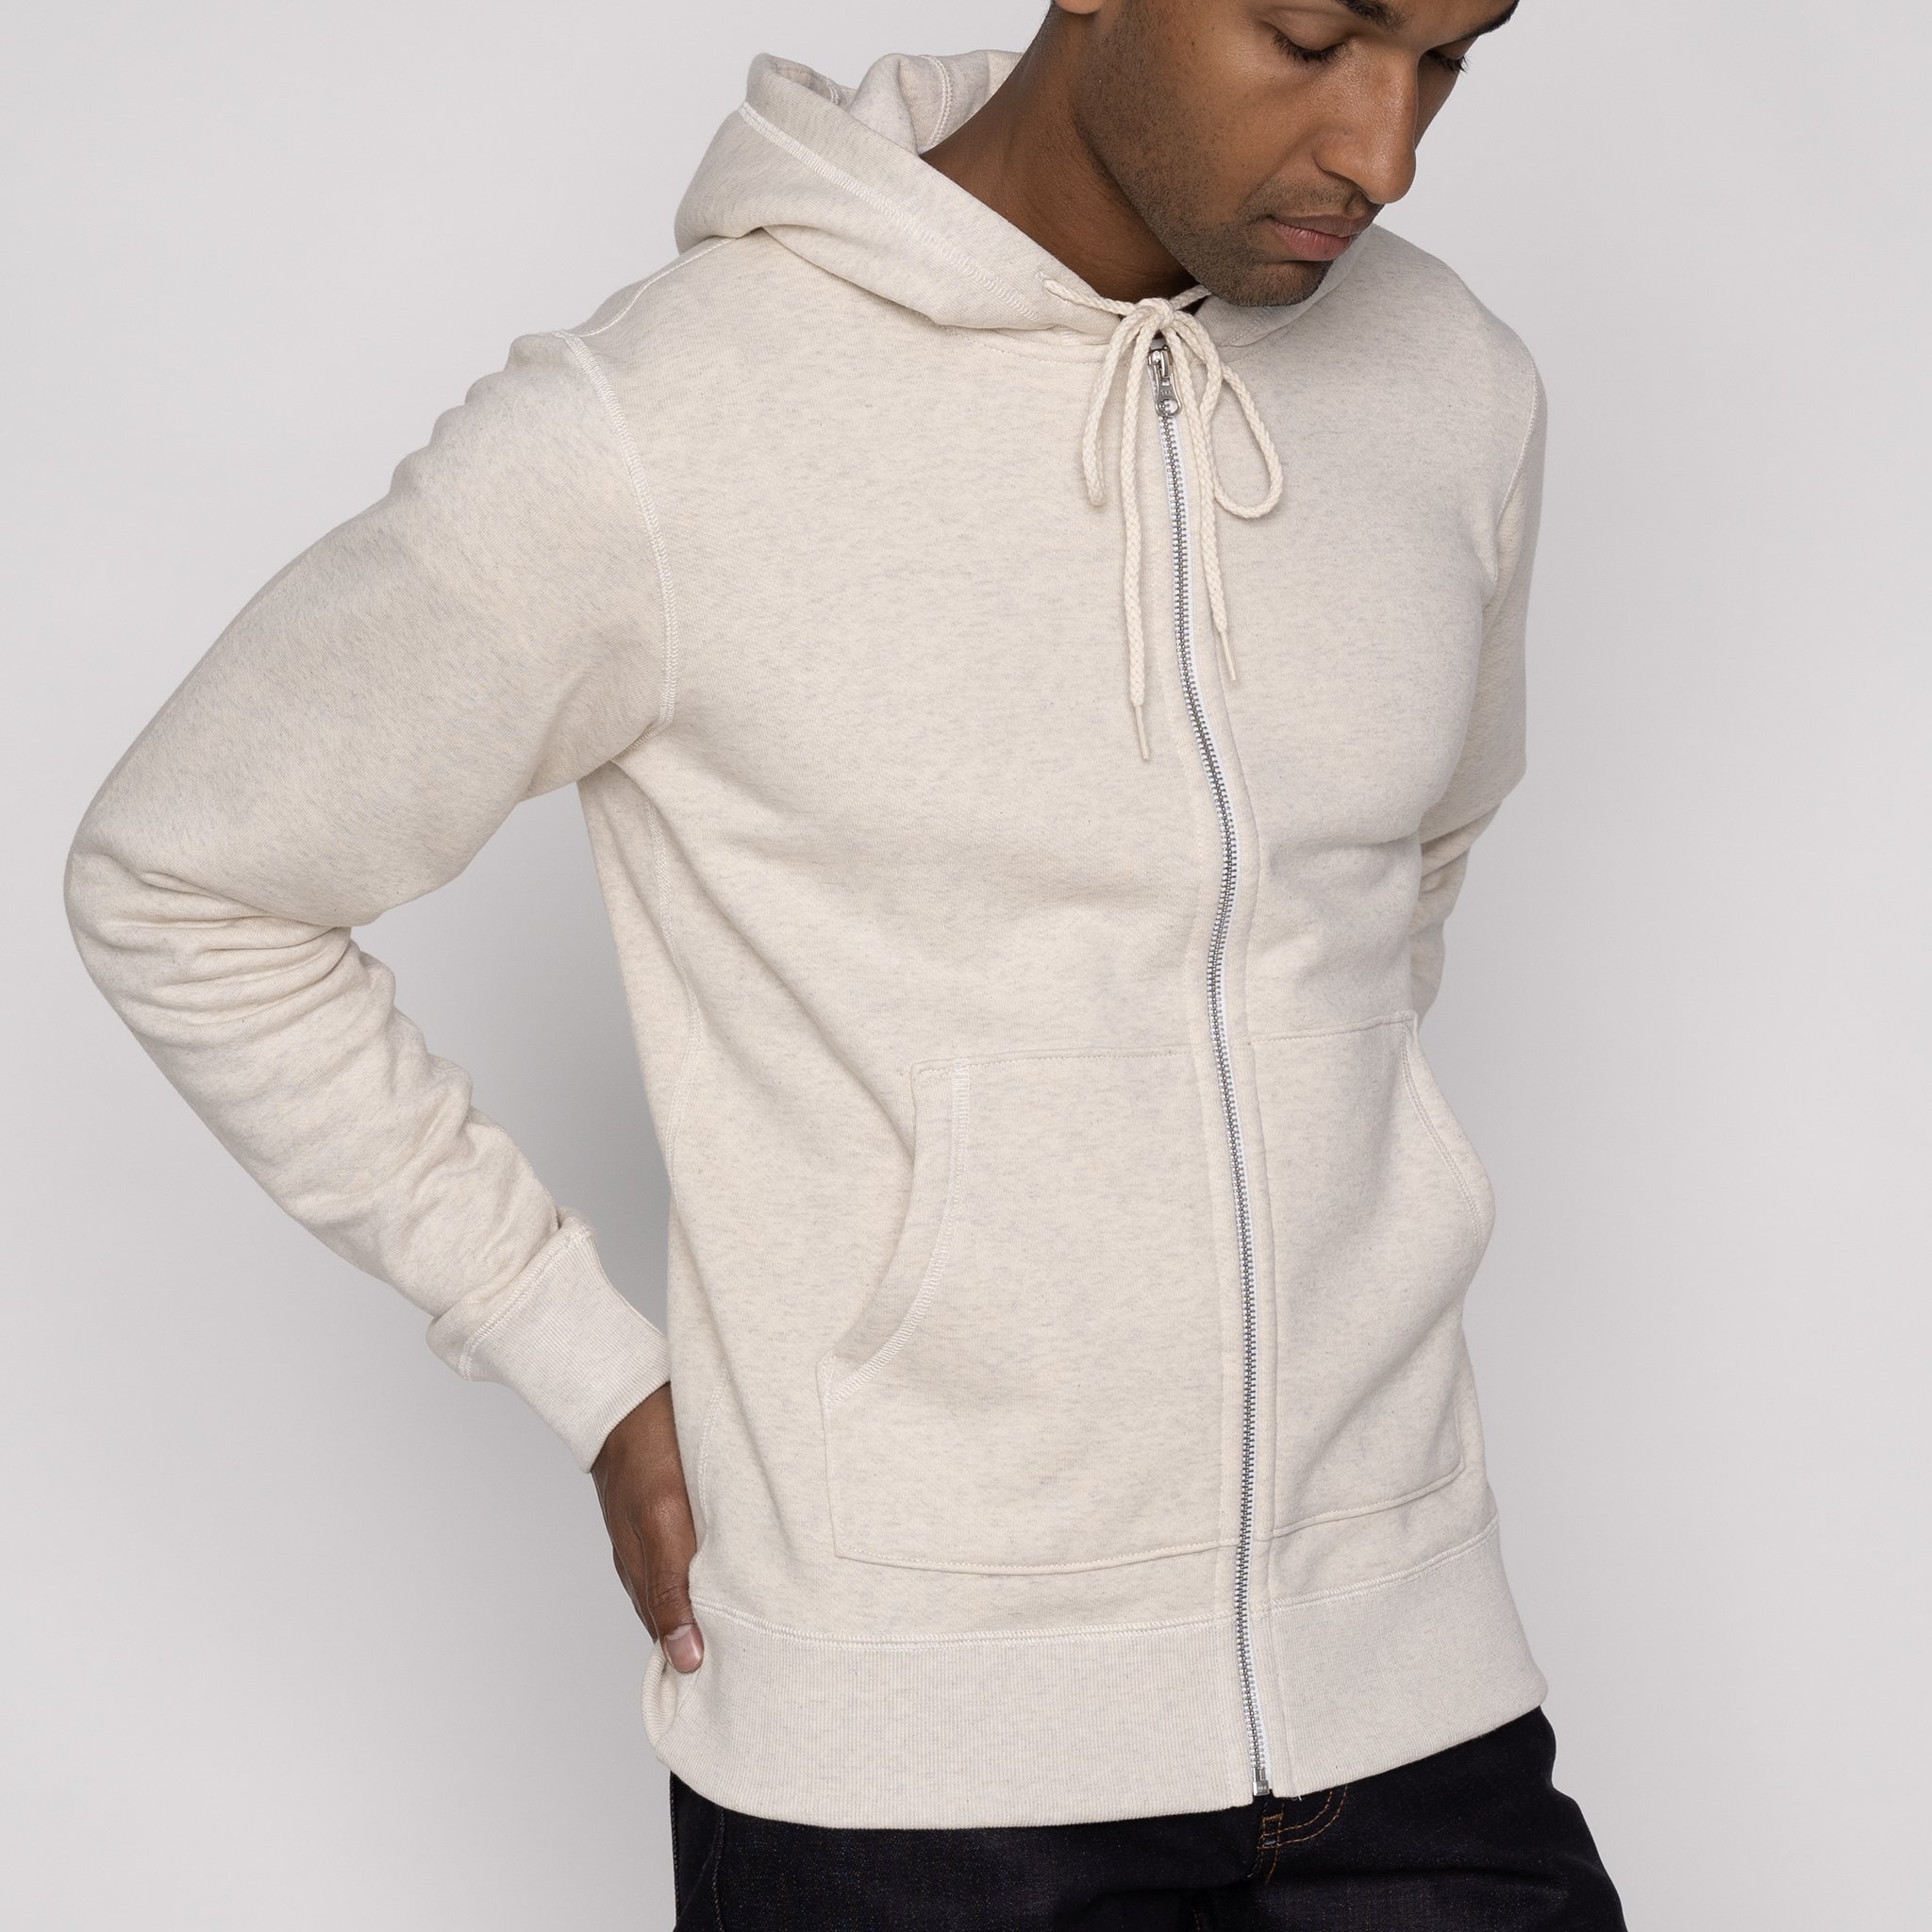  Zip Hoodie - French Terry - Oatmeal 